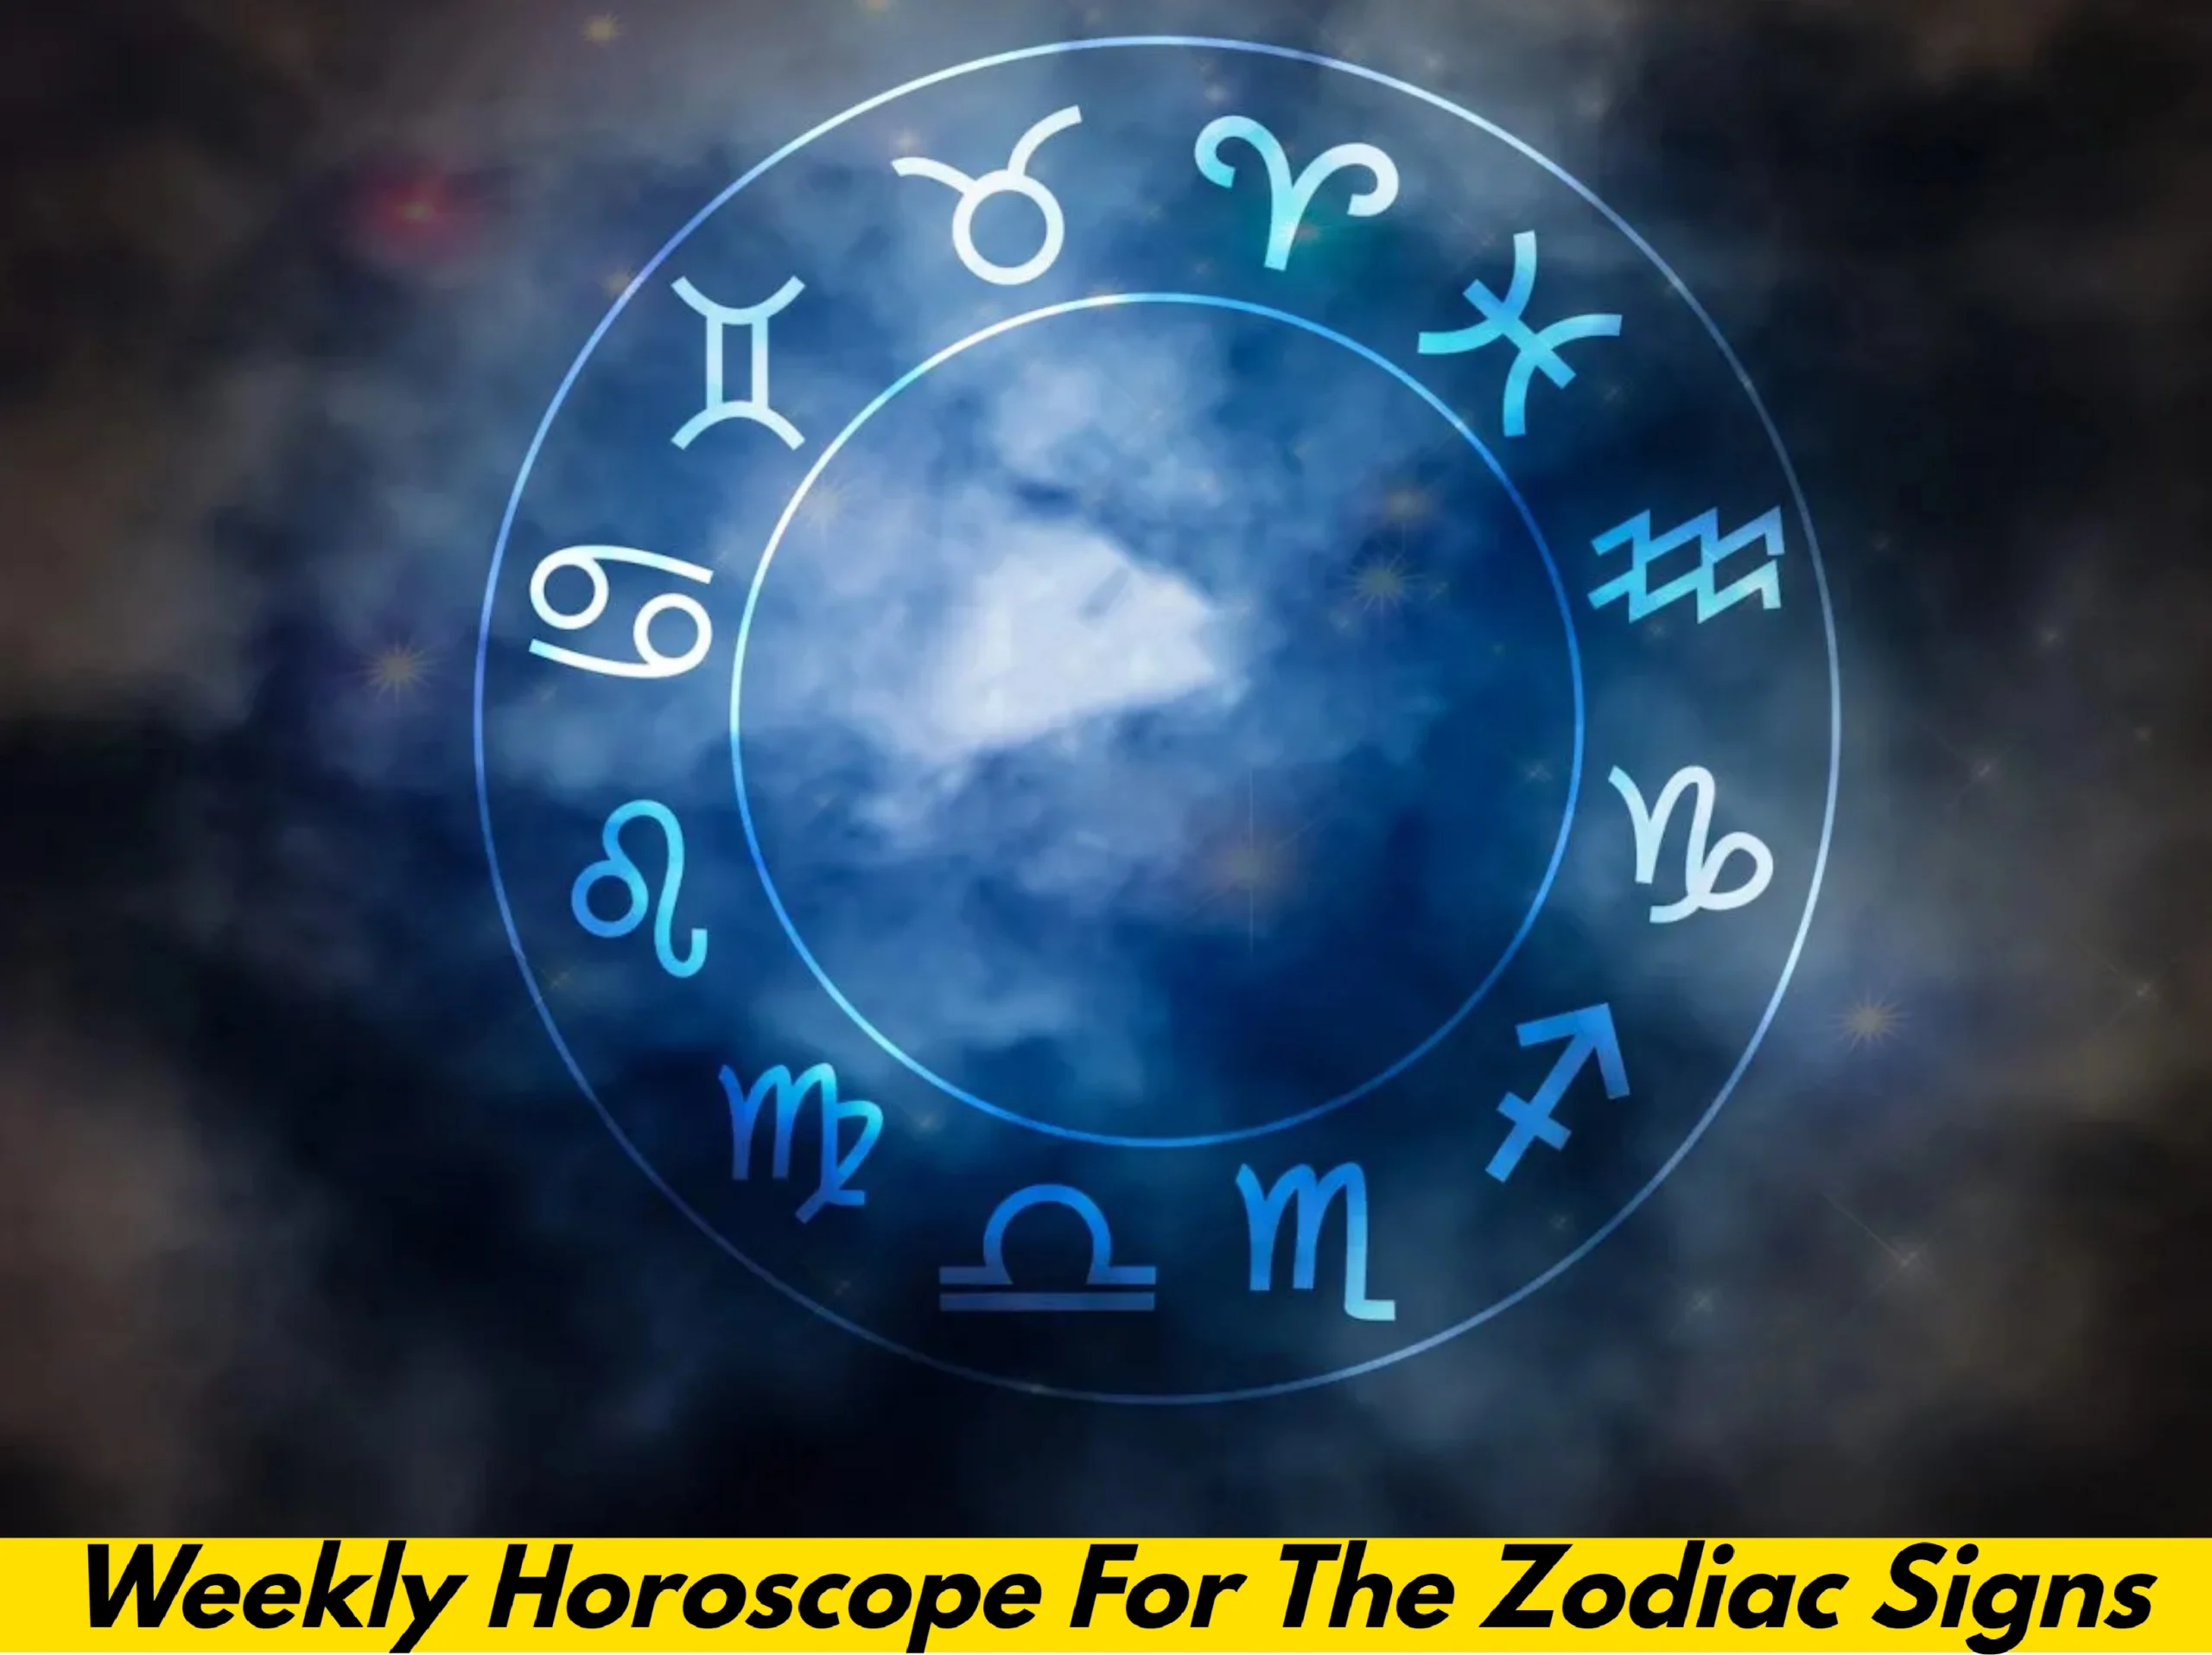 April10-16 Weekly Horoscope : Libra, Aquarius Be Alert! Its Not Good Week For You; Whereas Aries Might Get Some Surprises